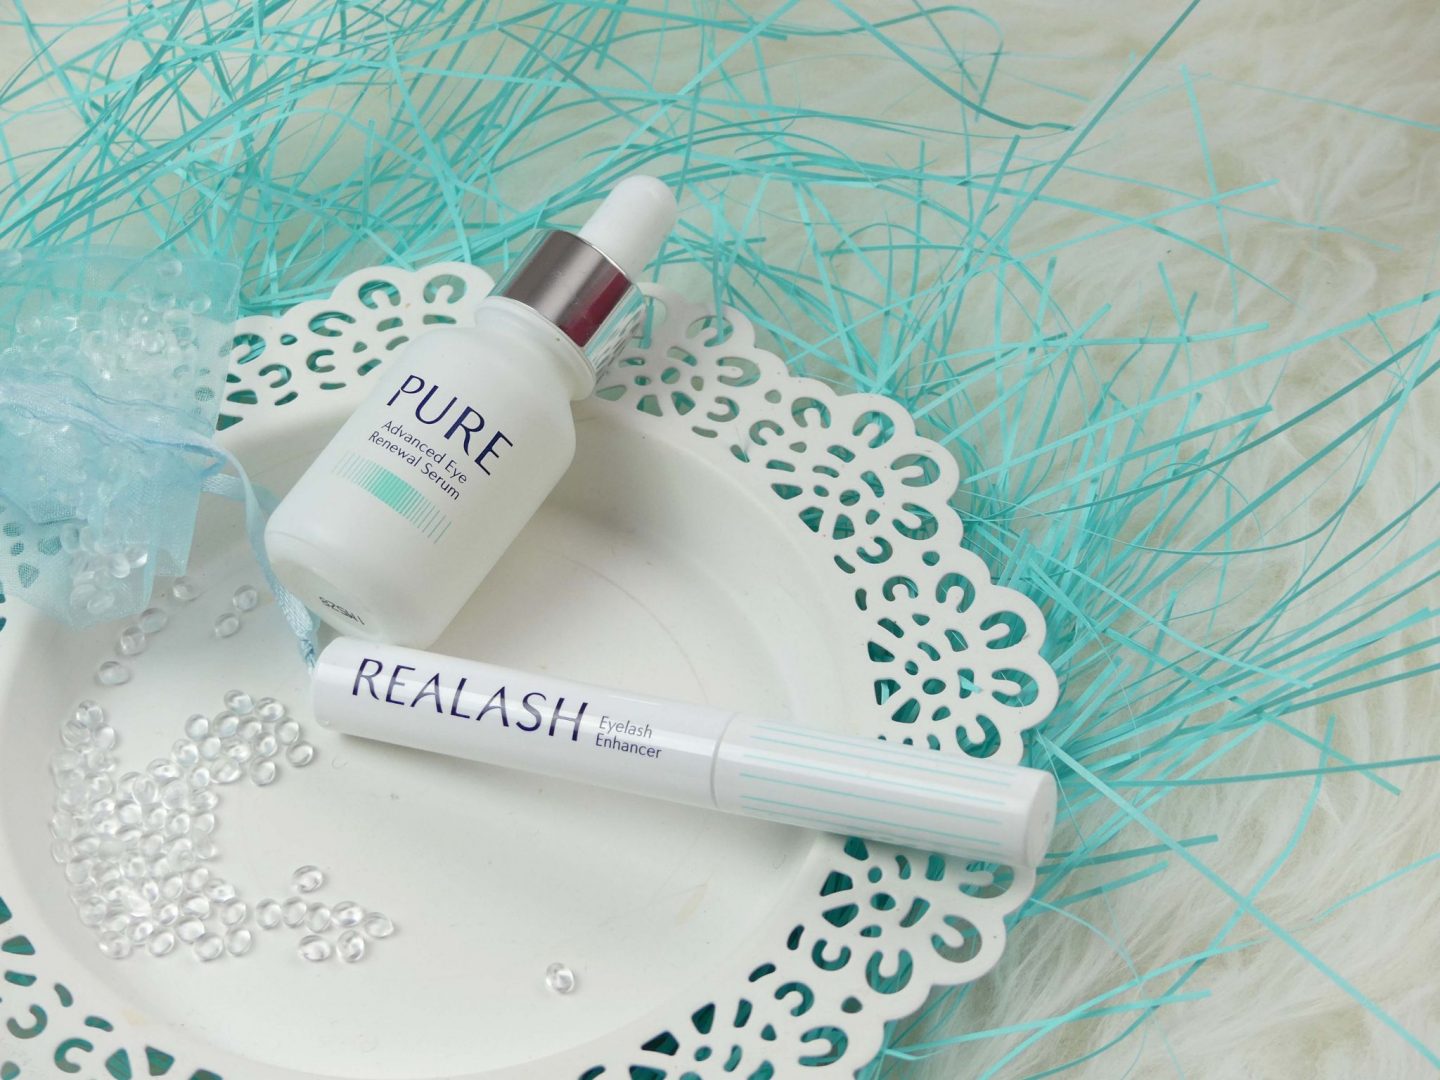 Realash Wimpernserum Review